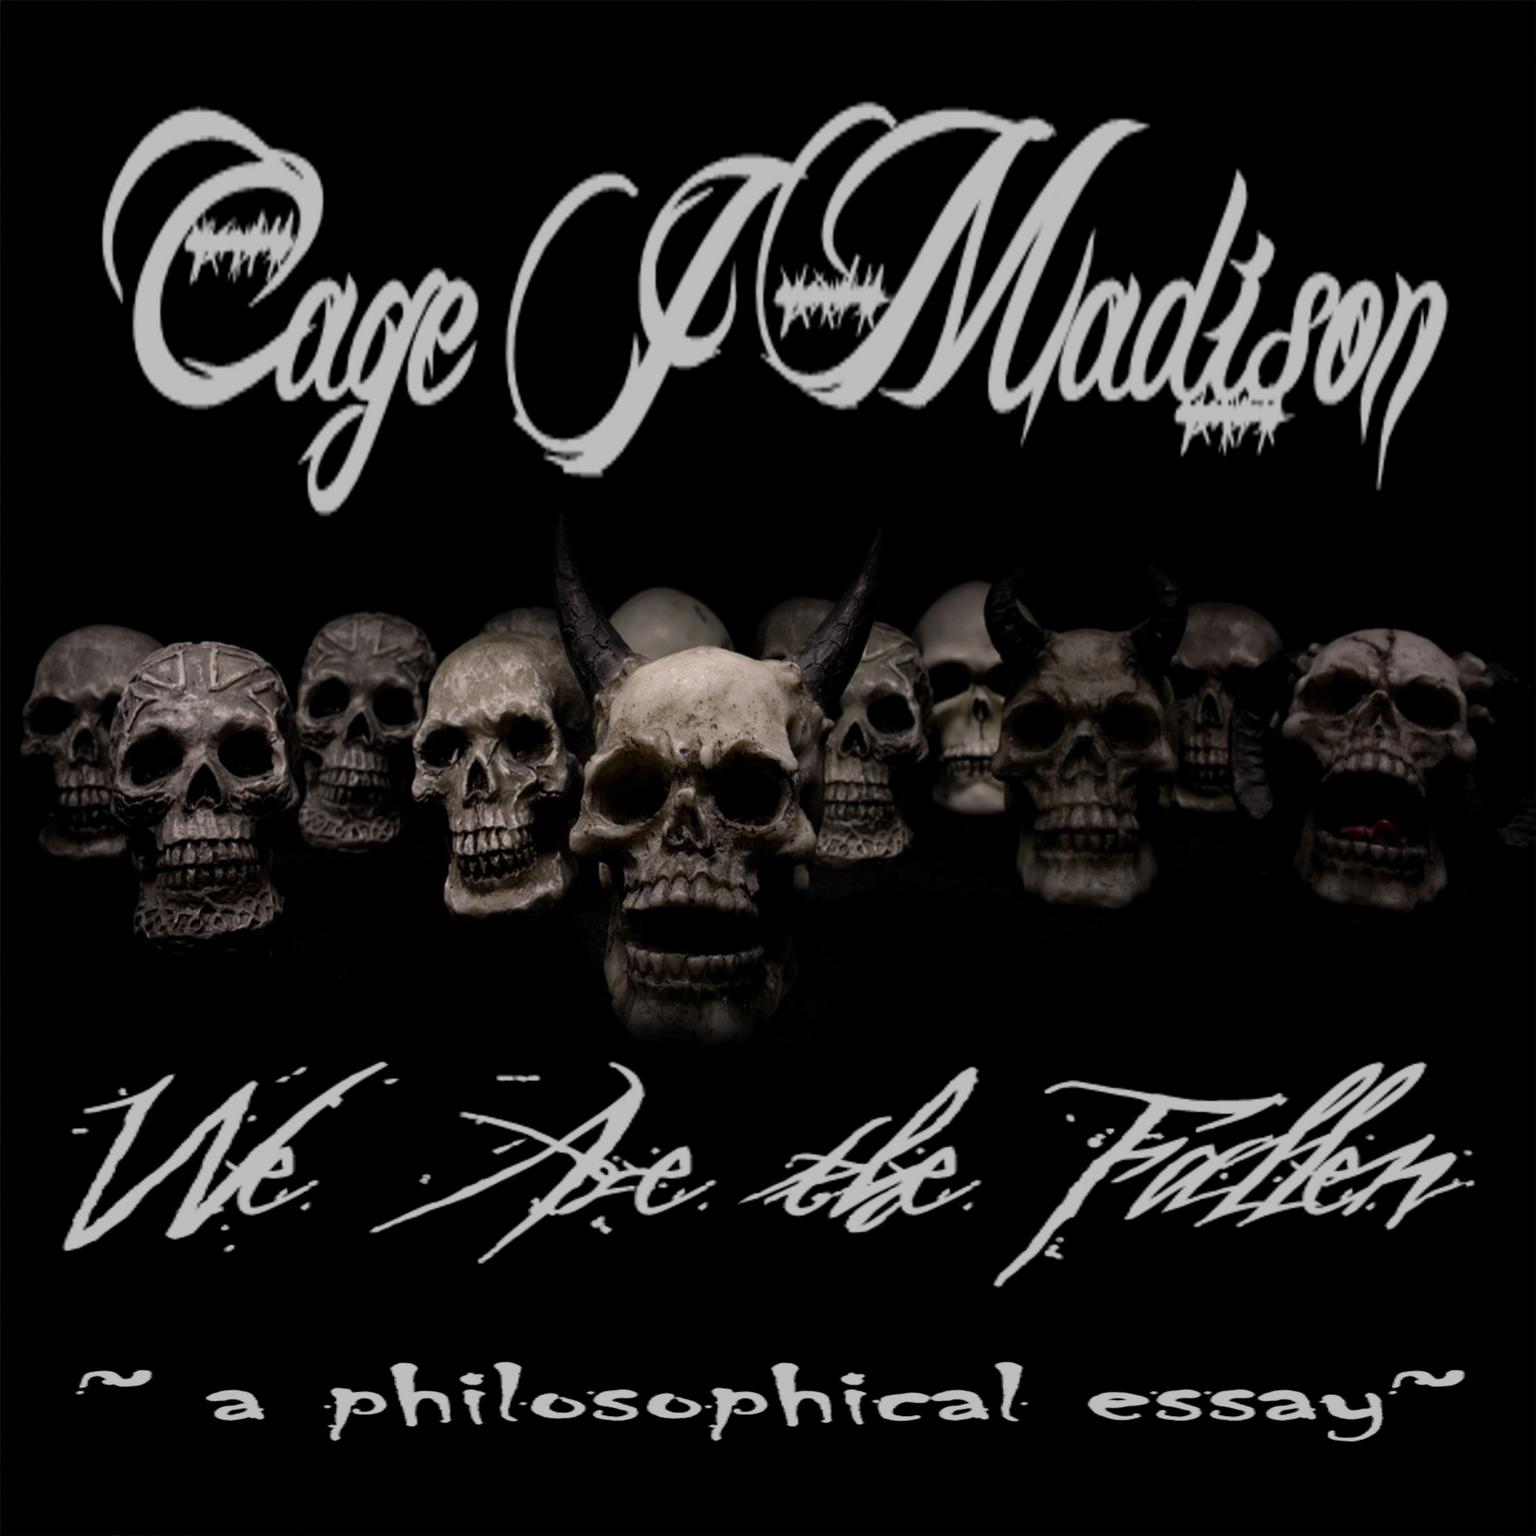 We Are the Fallen (Abridged): A Philosophical Essay Audiobook, by Cage J. Madison